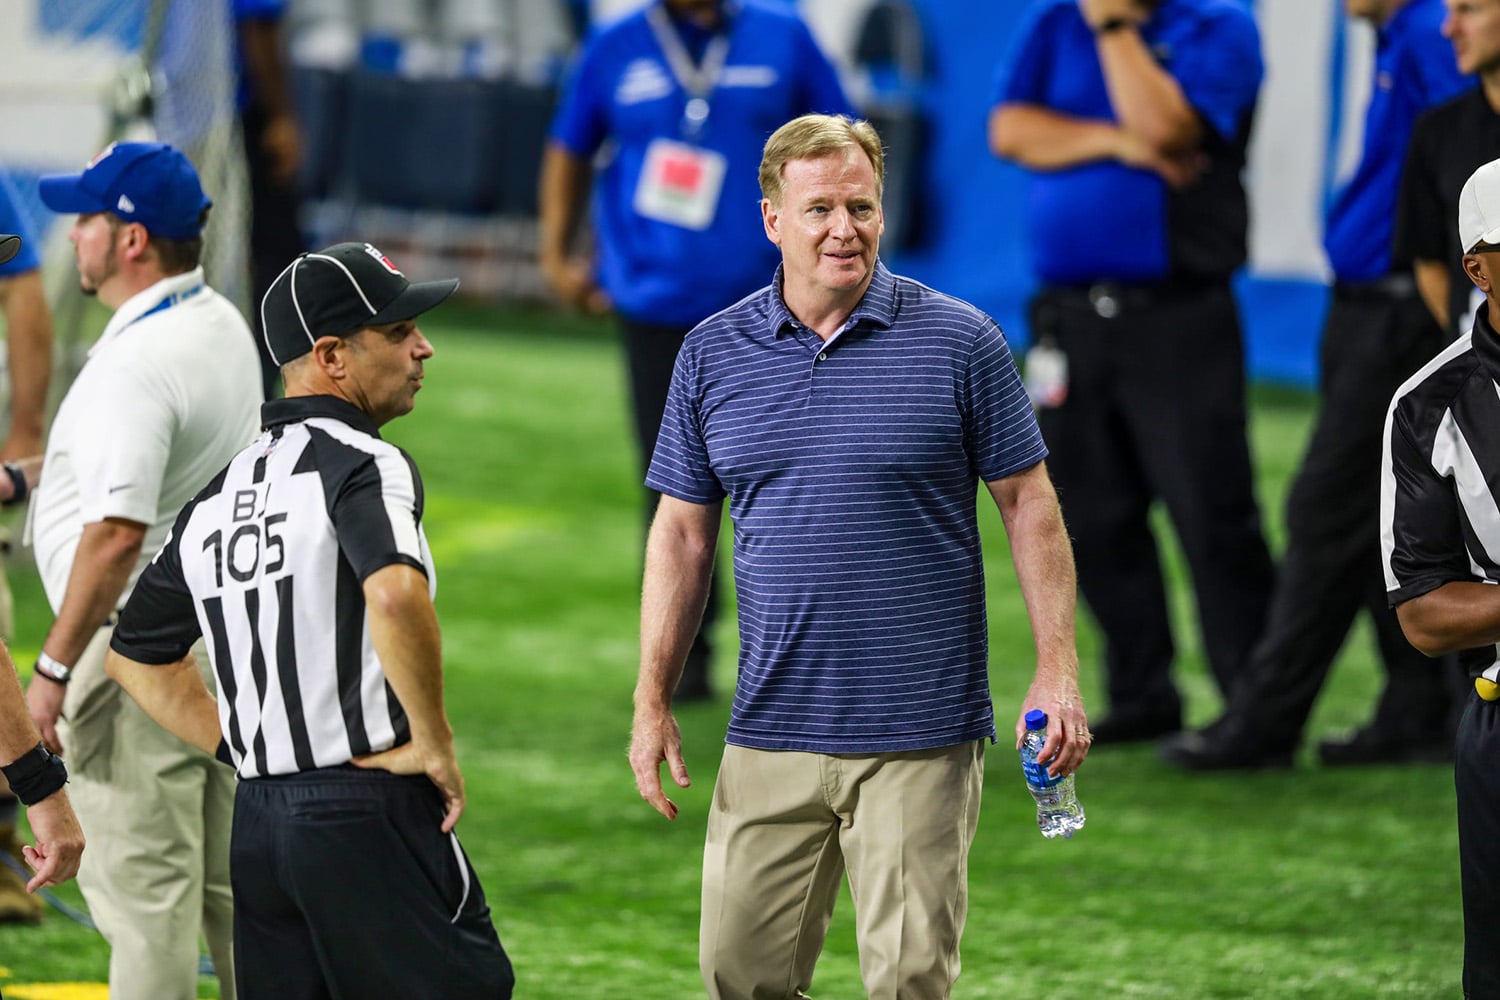 NFL Commissioner Roger Goodell standing next to official during a game